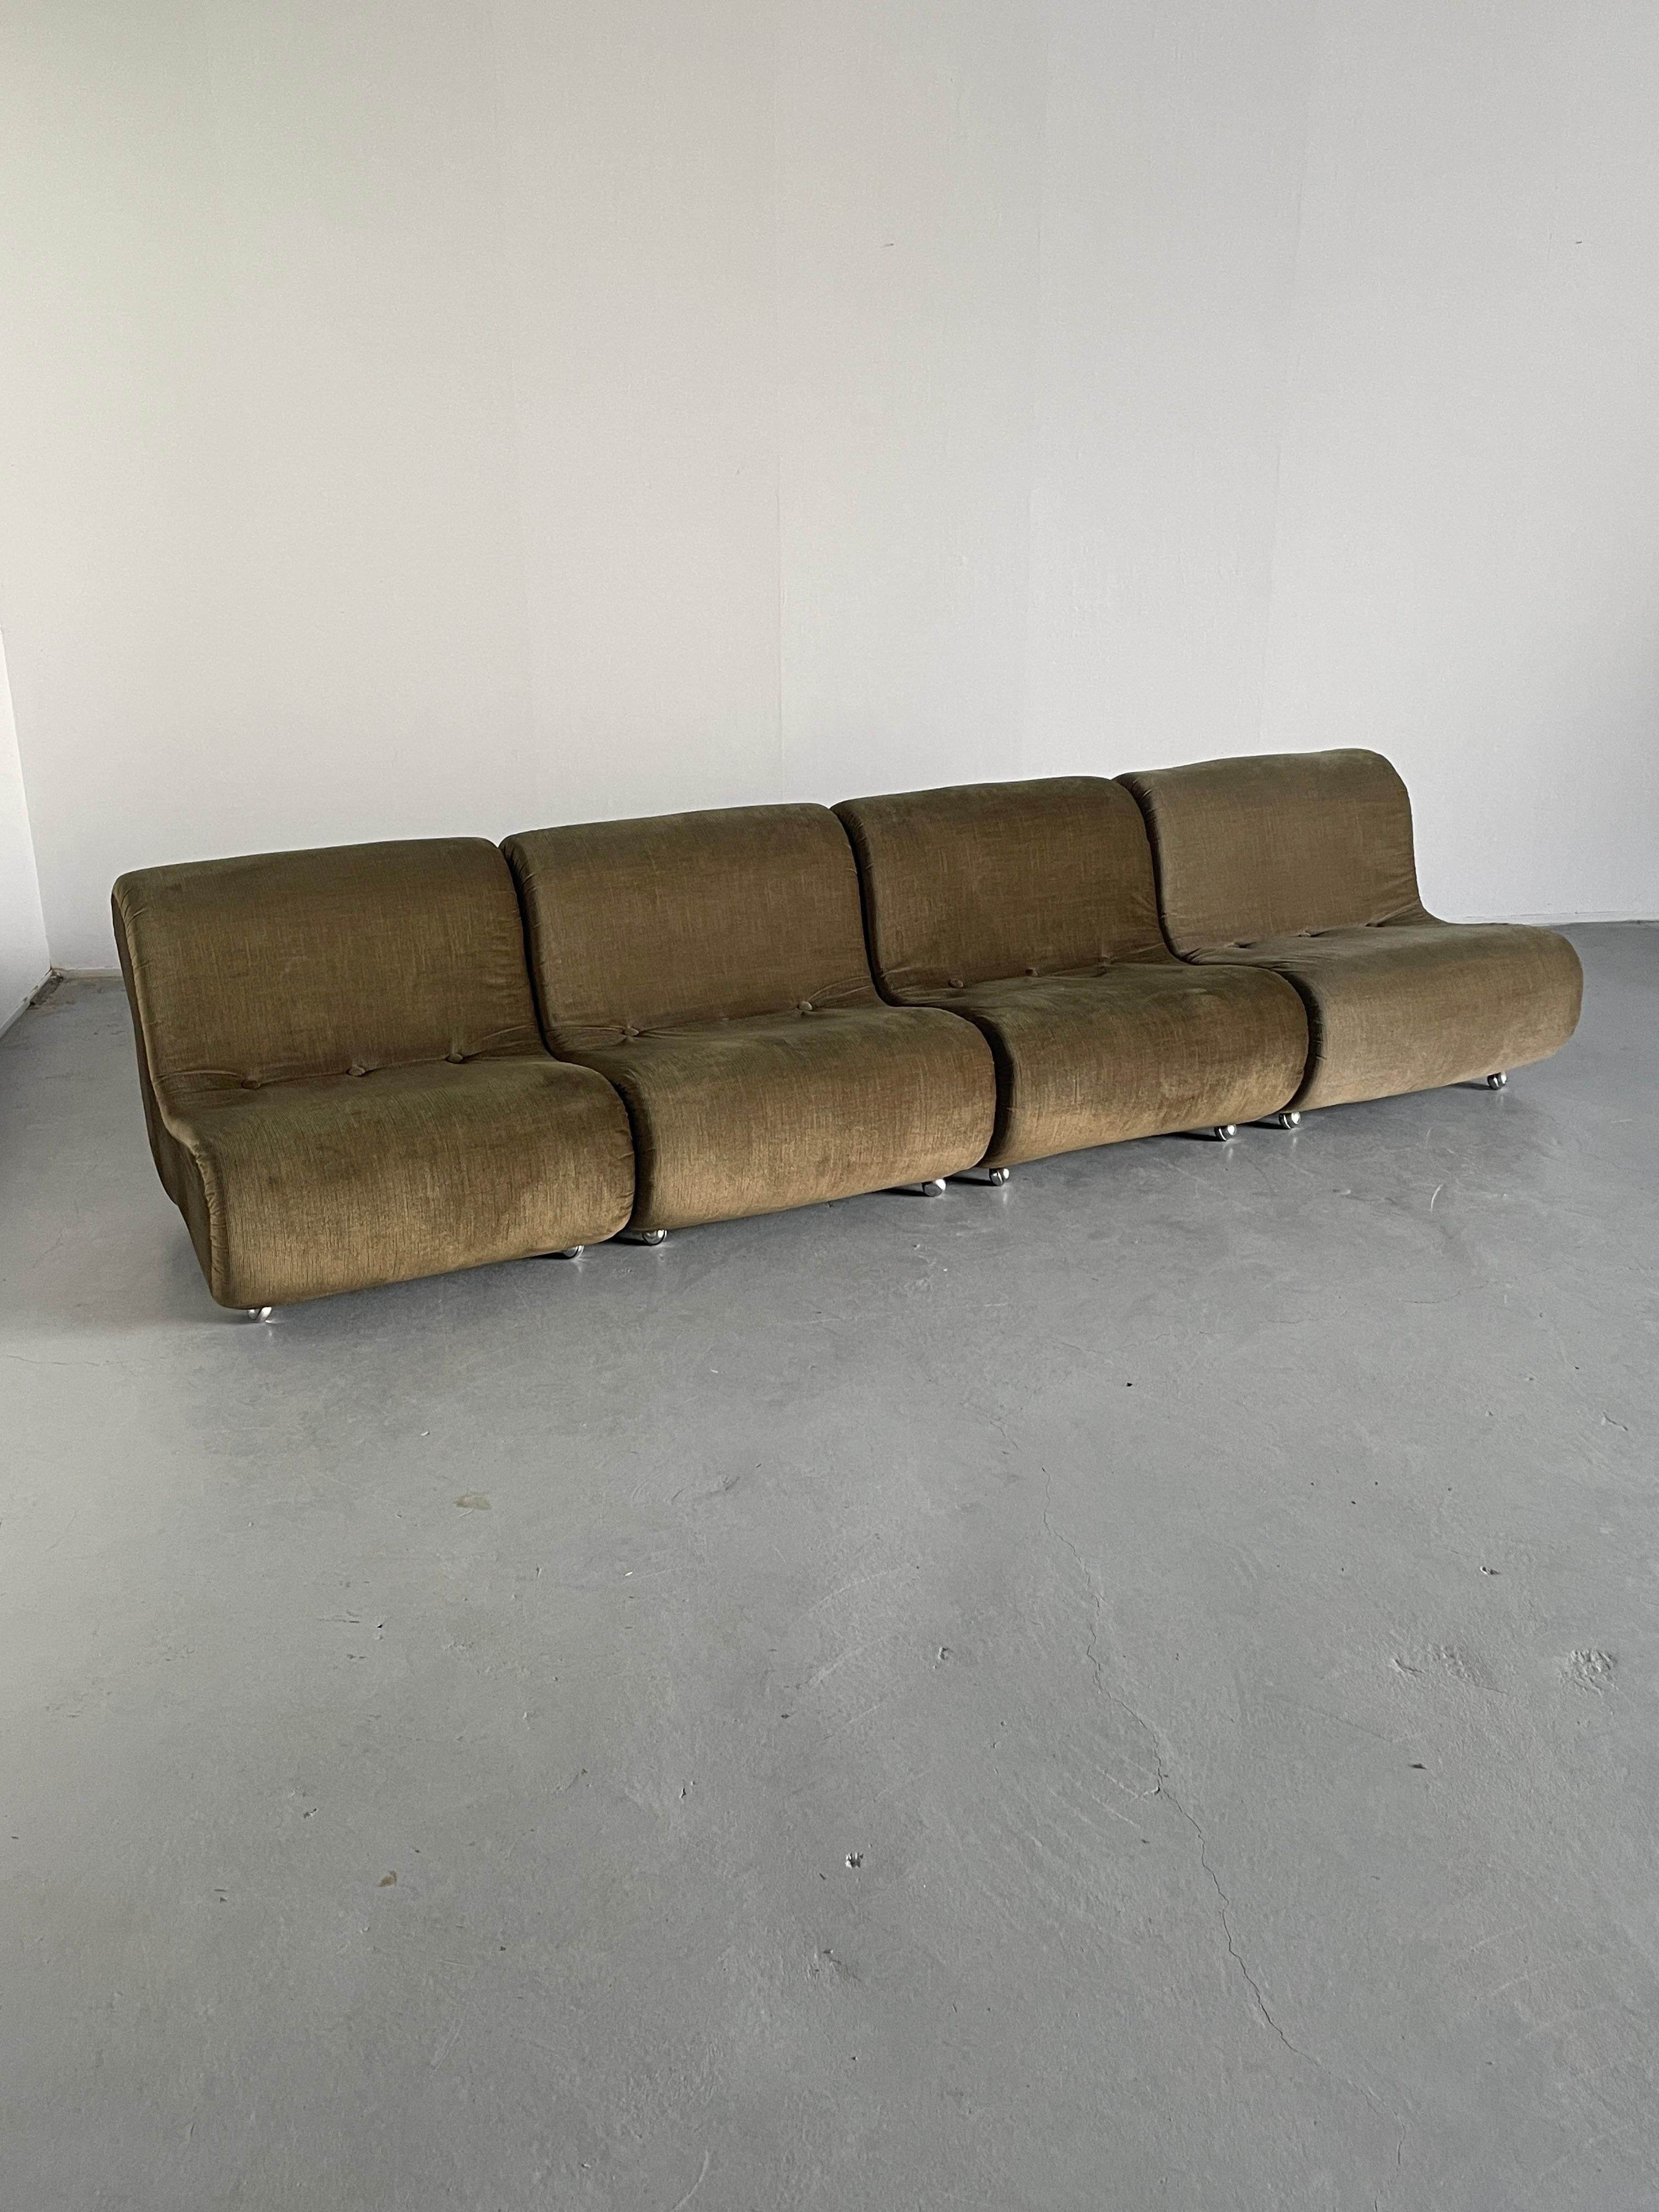 Late 20th Century Italian Space Age Modular Seating Set in Striped Brown Fabric, Set of 4, 1970s